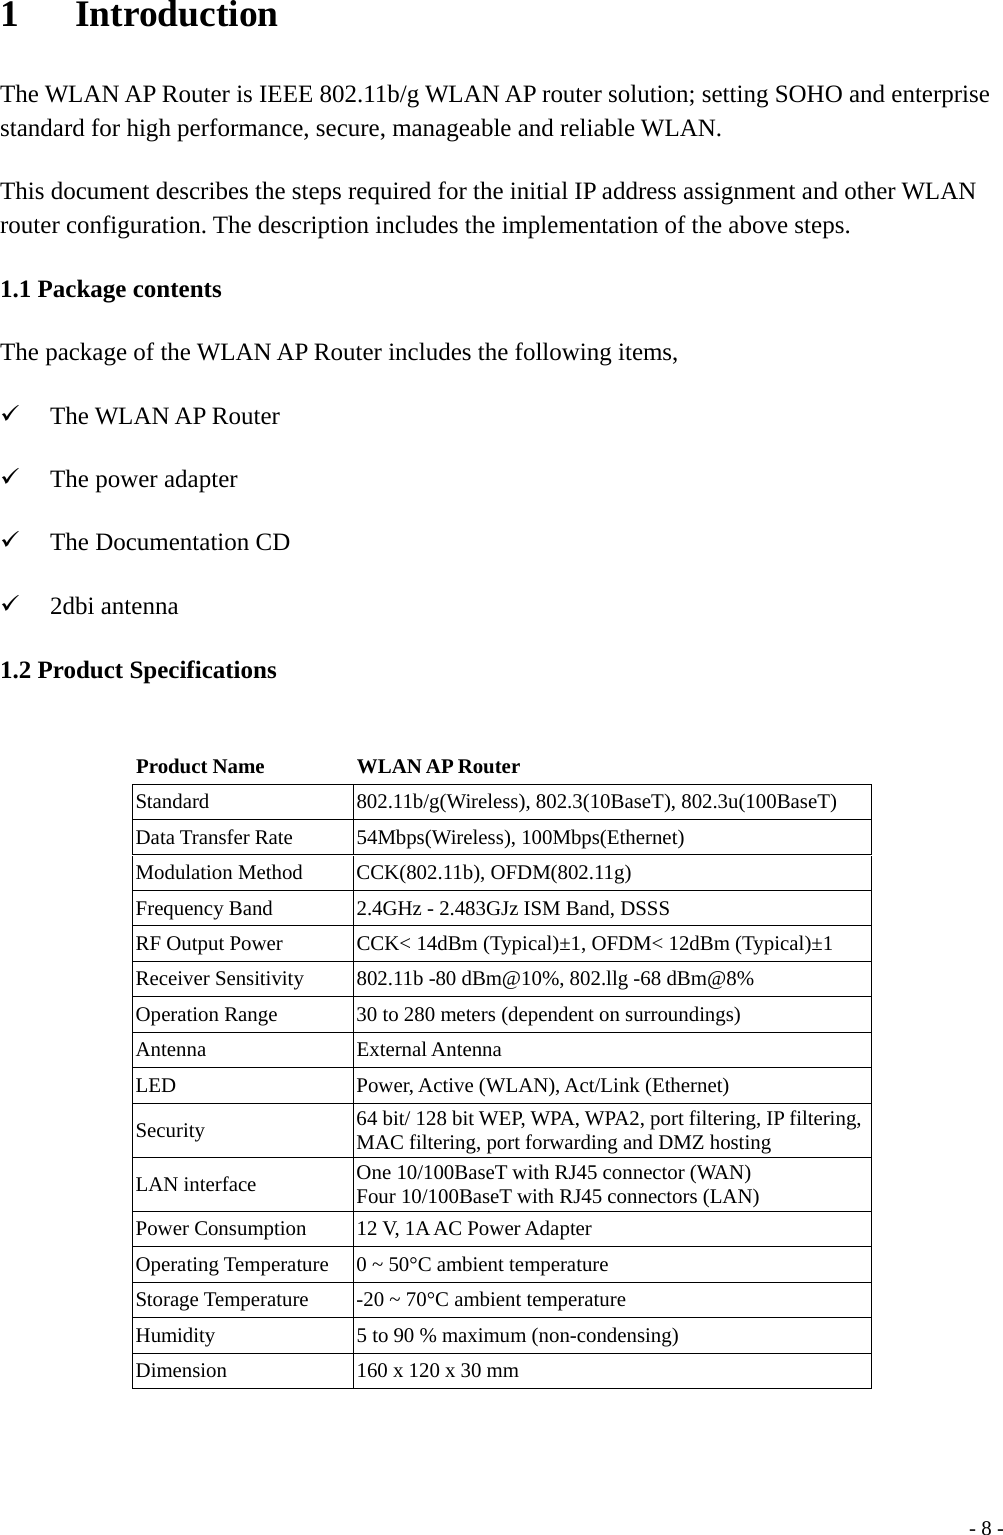 1   Introduction The WLAN AP Router is IEEE 802.11b/g WLAN AP router solution; setting SOHO and enterprise standard for high performance, secure, manageable and reliable WLAN. This document describes the steps required for the initial IP address assignment and other WLAN router configuration. The description includes the implementation of the above steps. 1.1 Package contents The package of the WLAN AP Router includes the following items, 9 The WLAN AP Router 9 The power adapter 9 The Documentation CD 9 2dbi antenna 1.2 Product Specifications  Product Name  WLAN AP Router Standard  802.11b/g(Wireless), 802.3(10BaseT), 802.3u(100BaseT) Data Transfer Rate  54Mbps(Wireless), 100Mbps(Ethernet) Modulation Method  CCK(802.11b), OFDM(802.11g) Frequency Band  2.4GHz - 2.483GJz ISM Band, DSSS RF Output Power CCK&lt; 14dBm (Typical)±1, OFDM&lt; 12dBm (Typical)±1 Receiver Sensitivity  802.11b -80 dBm@10%, 802.llg -68 dBm@8% Operation Range  30 to 280 meters (dependent on surroundings) Antenna External Antenna LED Power, Active (WLAN), Act/Link (Ethernet) Security  64 bit/ 128 bit WEP, WPA, WPA2, port filtering, IP filtering, MAC filtering, port forwarding and DMZ hosting LAN interface  One 10/100BaseT with RJ45 connector (WAN) Four 10/100BaseT with RJ45 connectors (LAN) Power Consumption  12 V, 1A AC Power Adapter Operating Temperature  0 ~ 50°C ambient temperature Storage Temperature  -20 ~ 70°C ambient temperature Humidity  5 to 90 % maximum (non-condensing) Dimension  160 x 120 x 30 mm   - 8 -